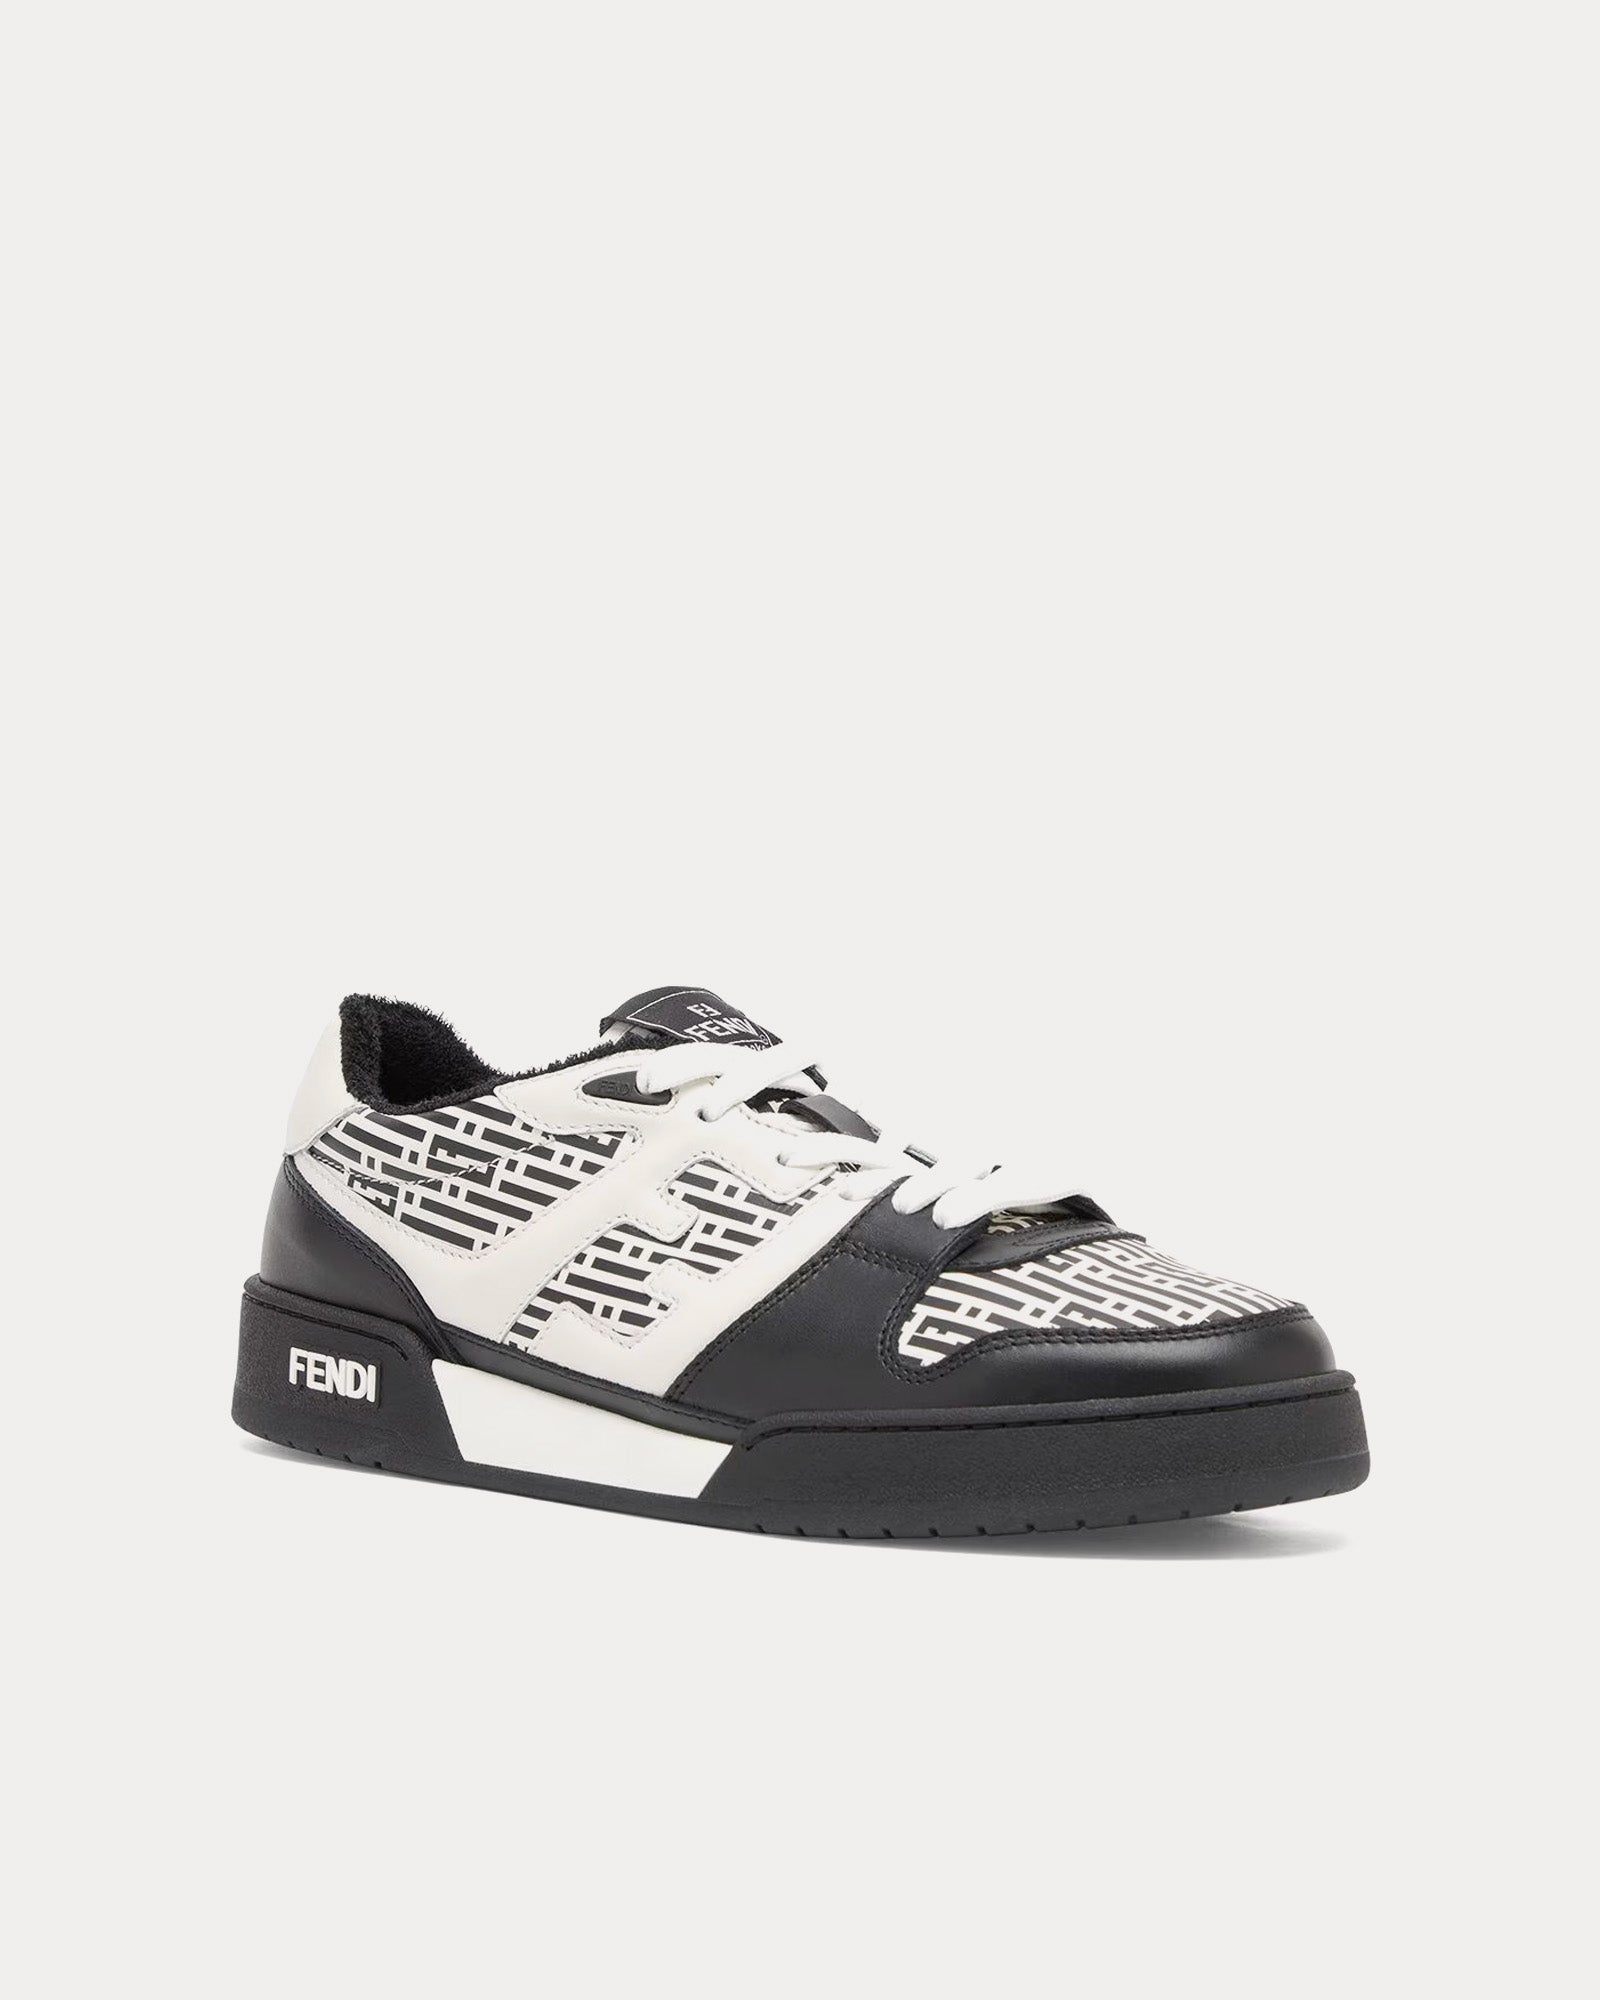 Fendi by Stefano Pilati - Match Leather White / Black Low Top Sneakers